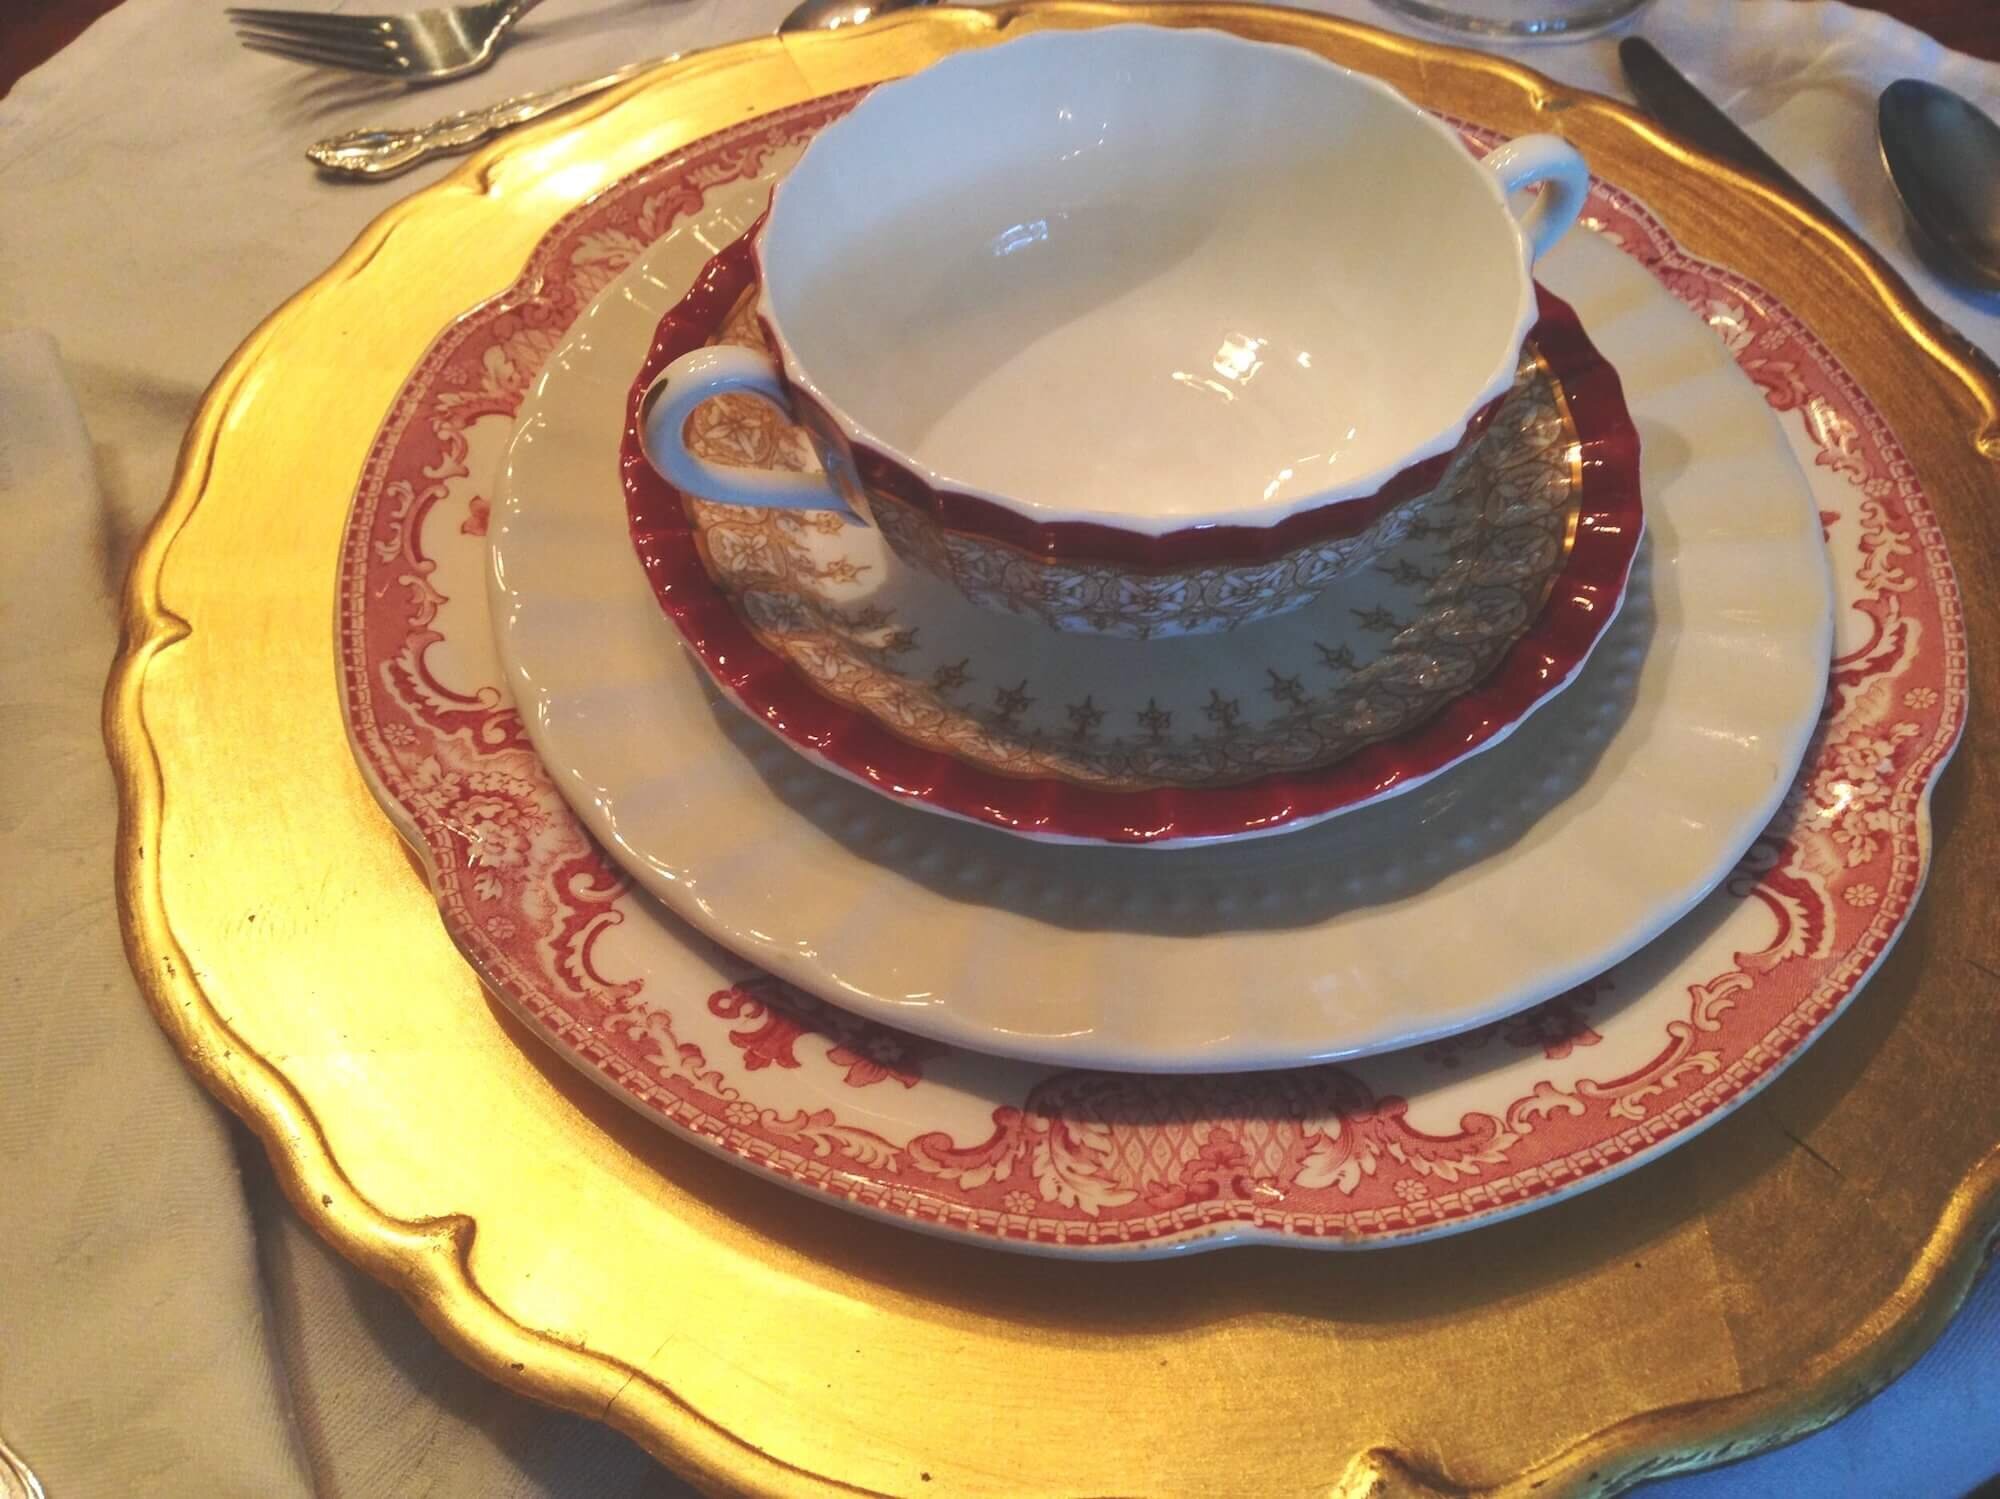 Set of Red-Banded Williams-Sonoma Dinnerware